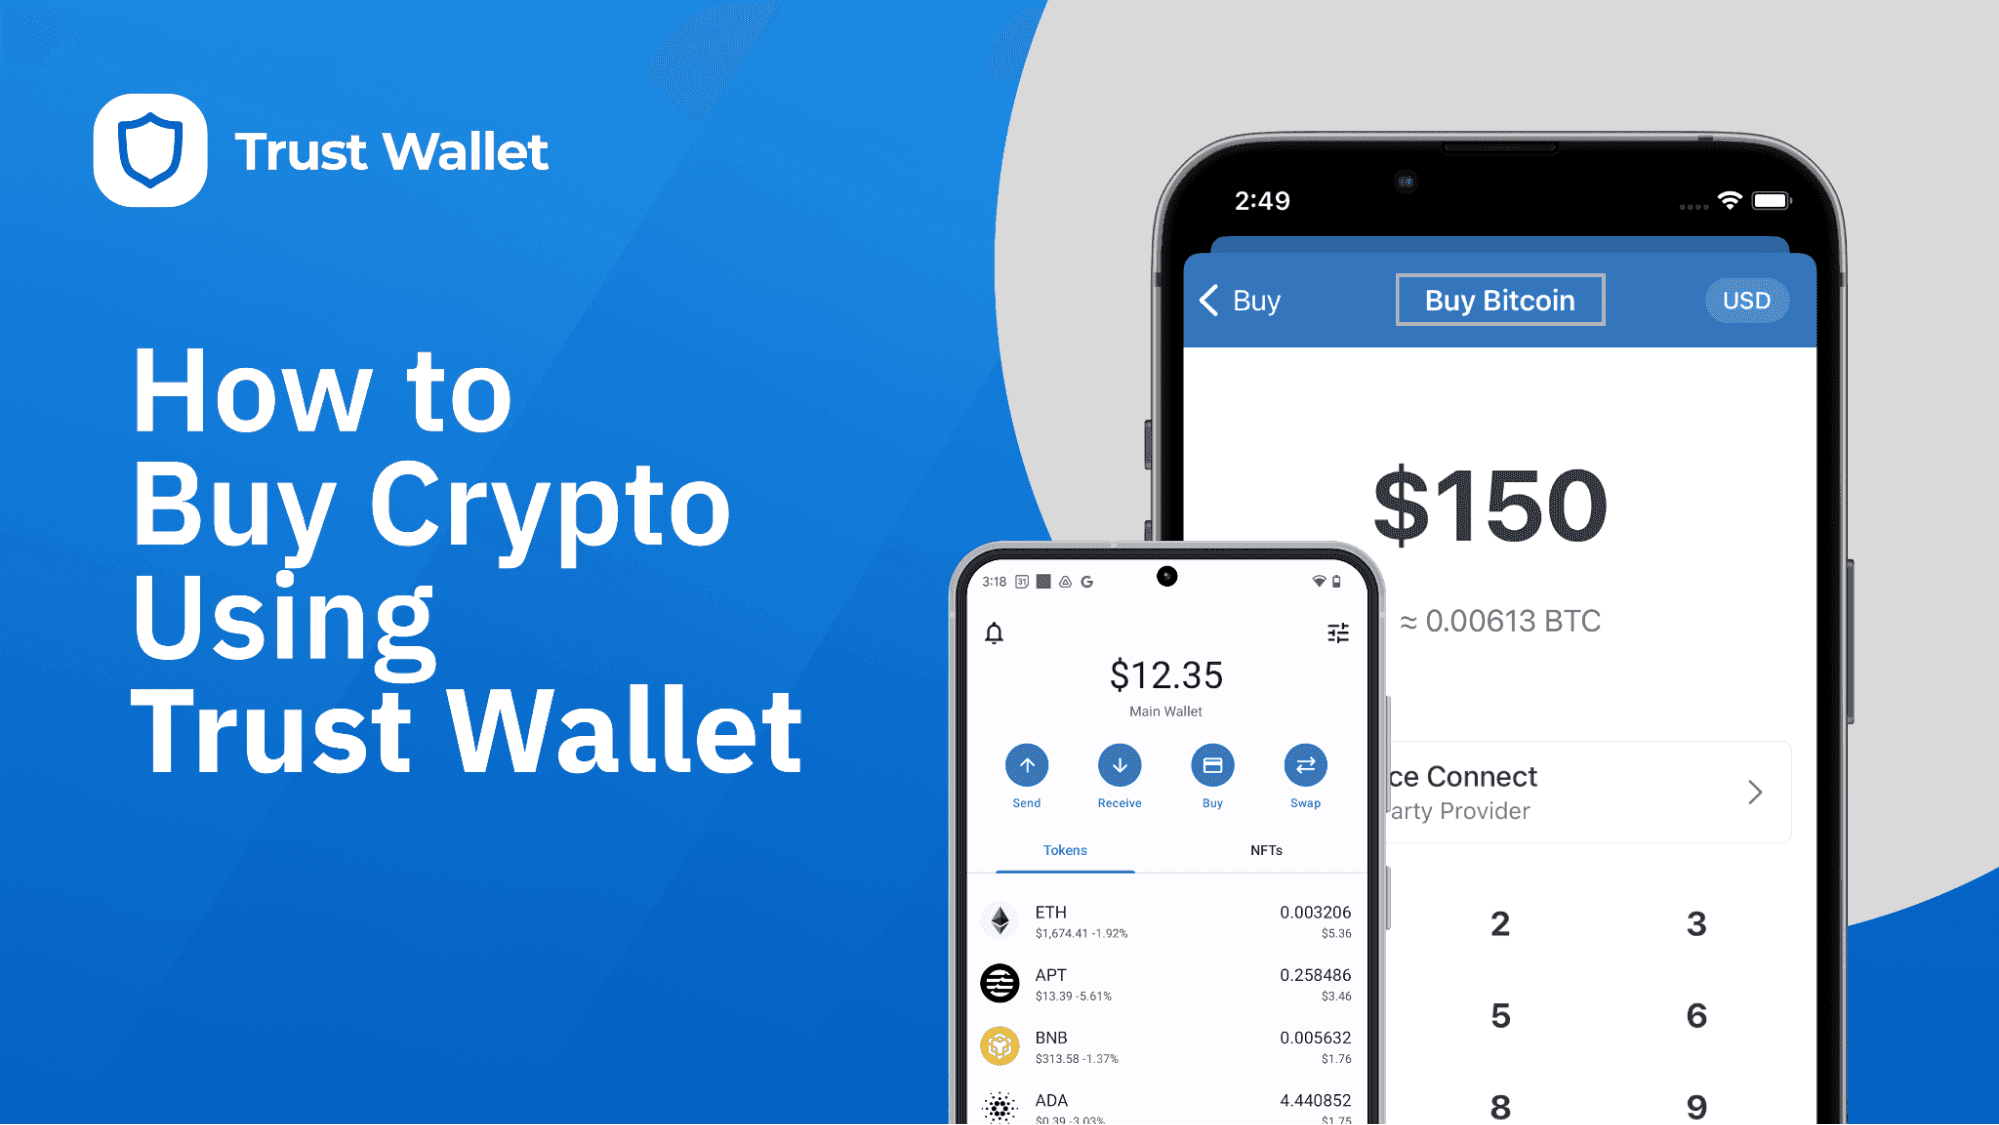 How to Buy Cryptocurrency Using Trust Wallet